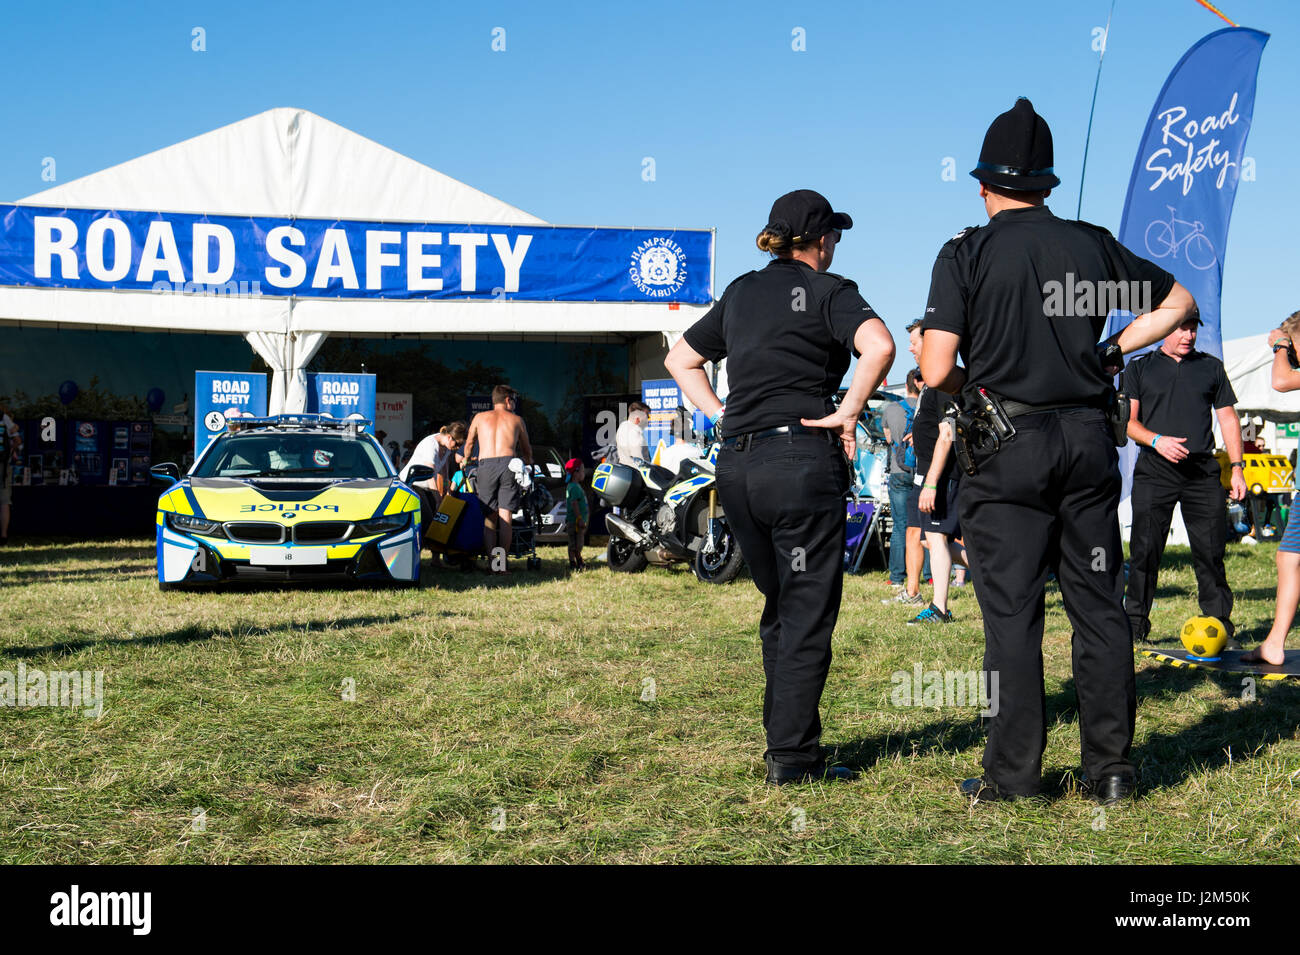 Laverstoke Park Farm, Overton, Basingstoke, Hampshire, United Kingdom. 26 August 2016. Hampshire Constabulary Road Safety Police stand with the police BMW I8 hybrid supercar at Radio 2 breakfast show DJ, Chris Evans' Car Fest South 2016 - Car, Food, Family and Music Festival for BBC Children in Need. © Will Bailey / Alamy Stock Photo